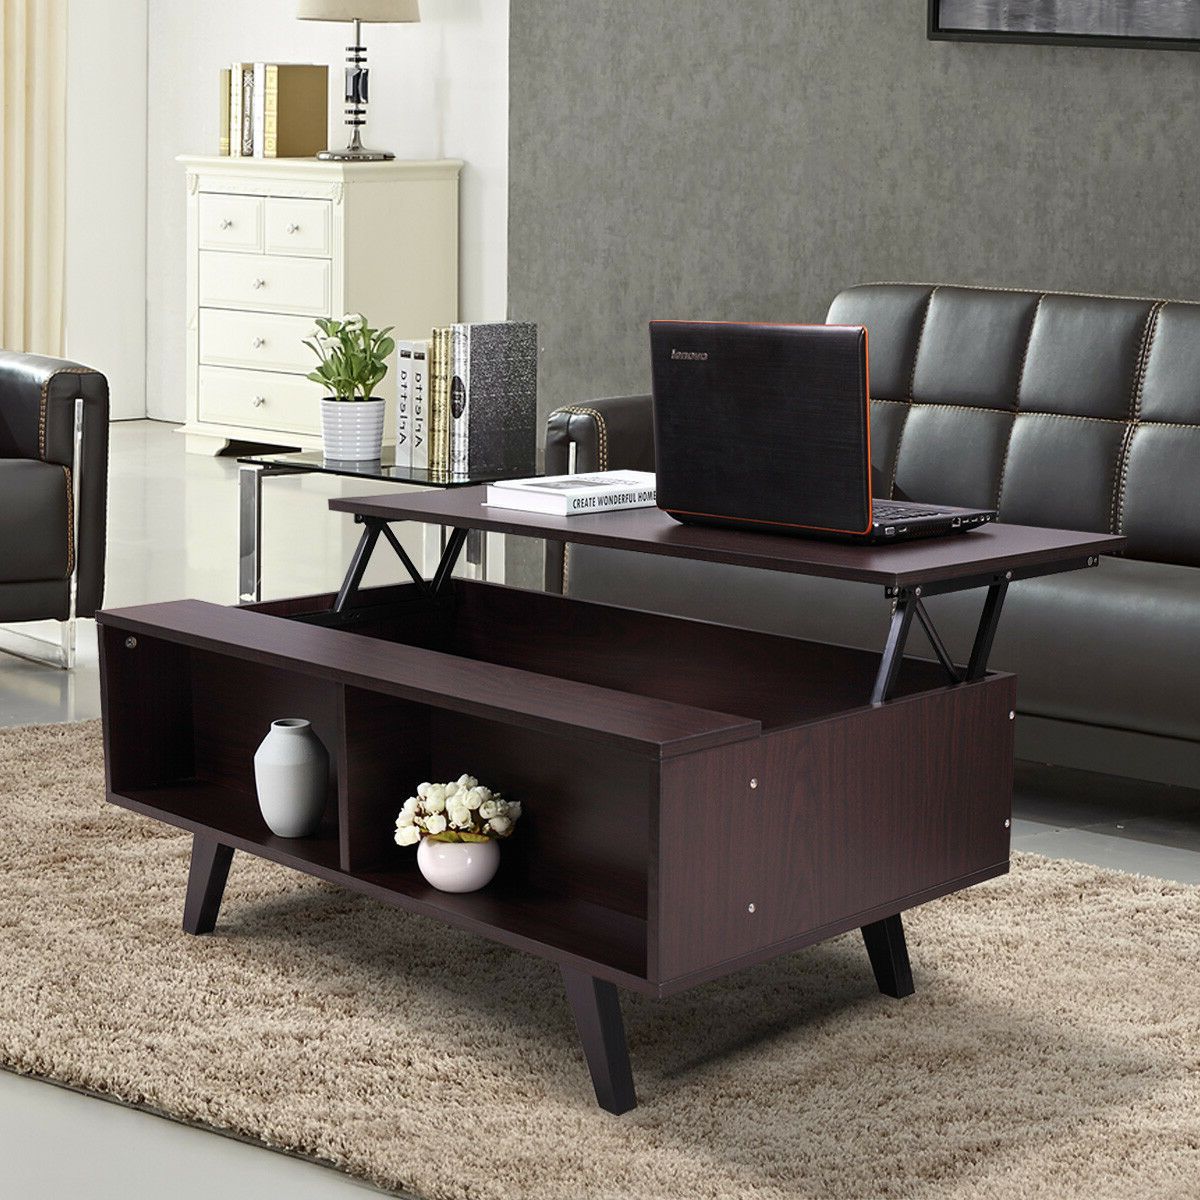 2020 Lowestbest Lift Top Coffee Table, Wood Coffee Table, Cocktail Table Within Black Wood Storage Coffee Tables (View 2 of 10)